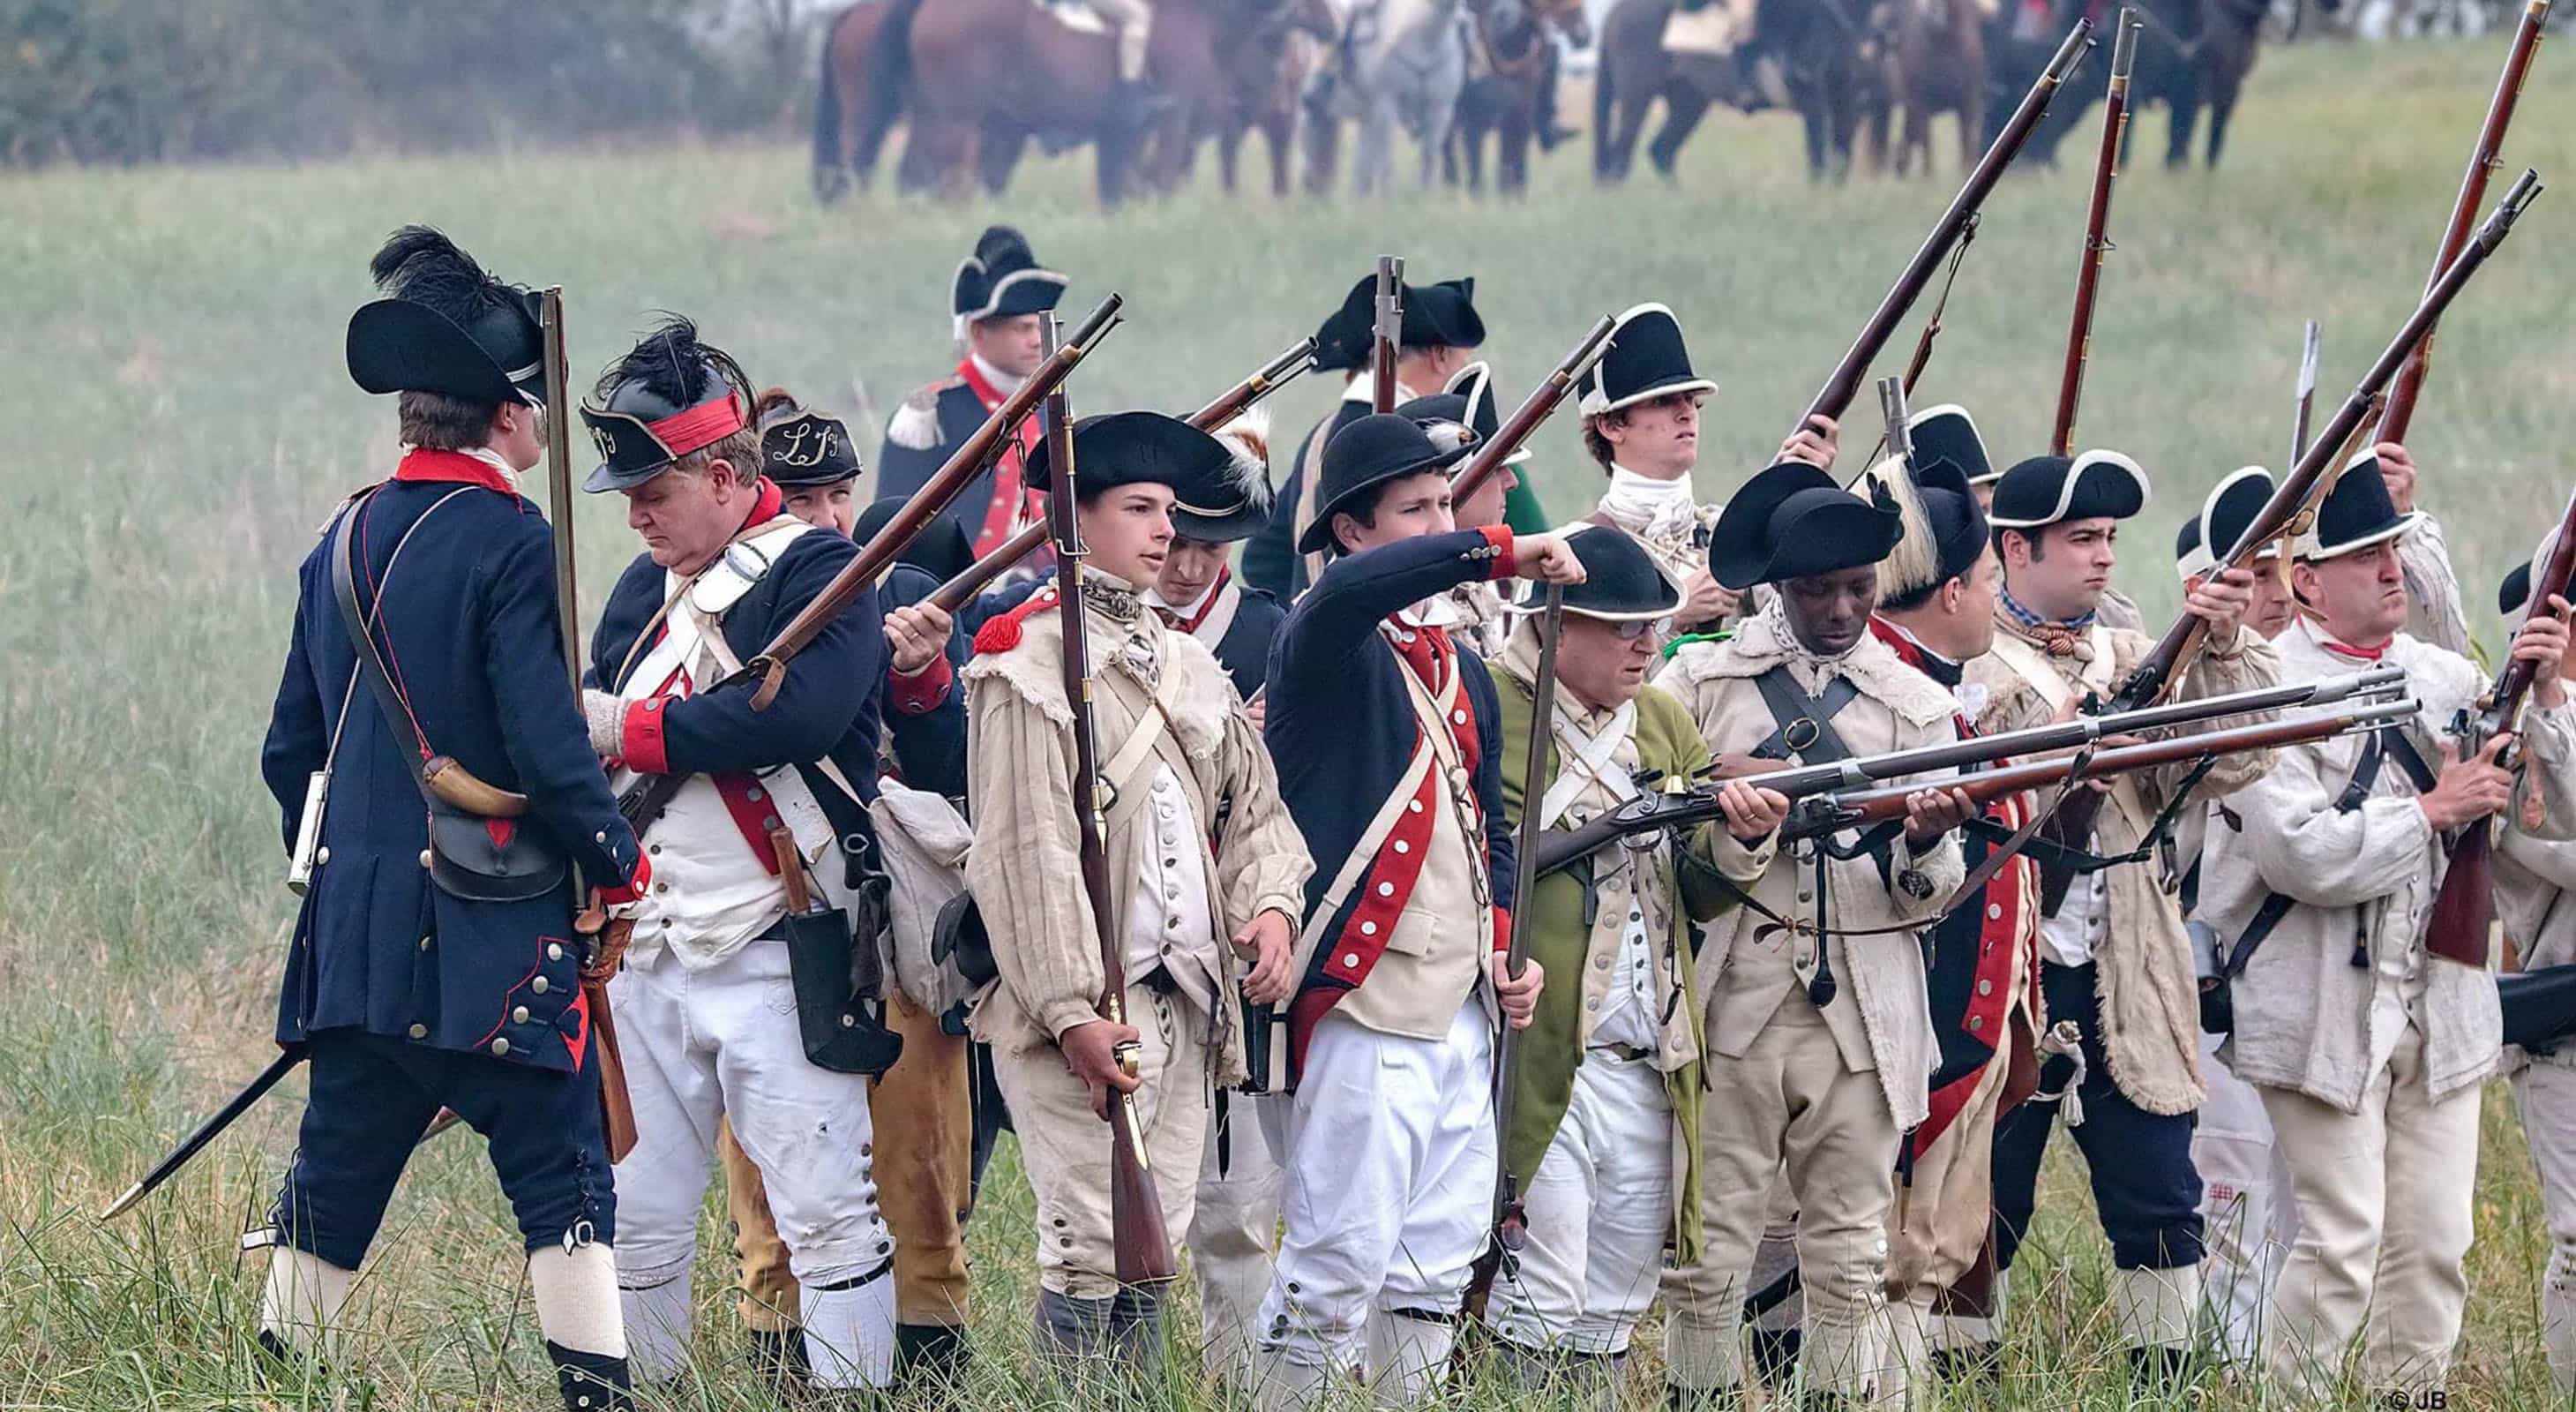 Revolutionary war reenactment at Mt Harmon - a favorite Chestertown, MD event